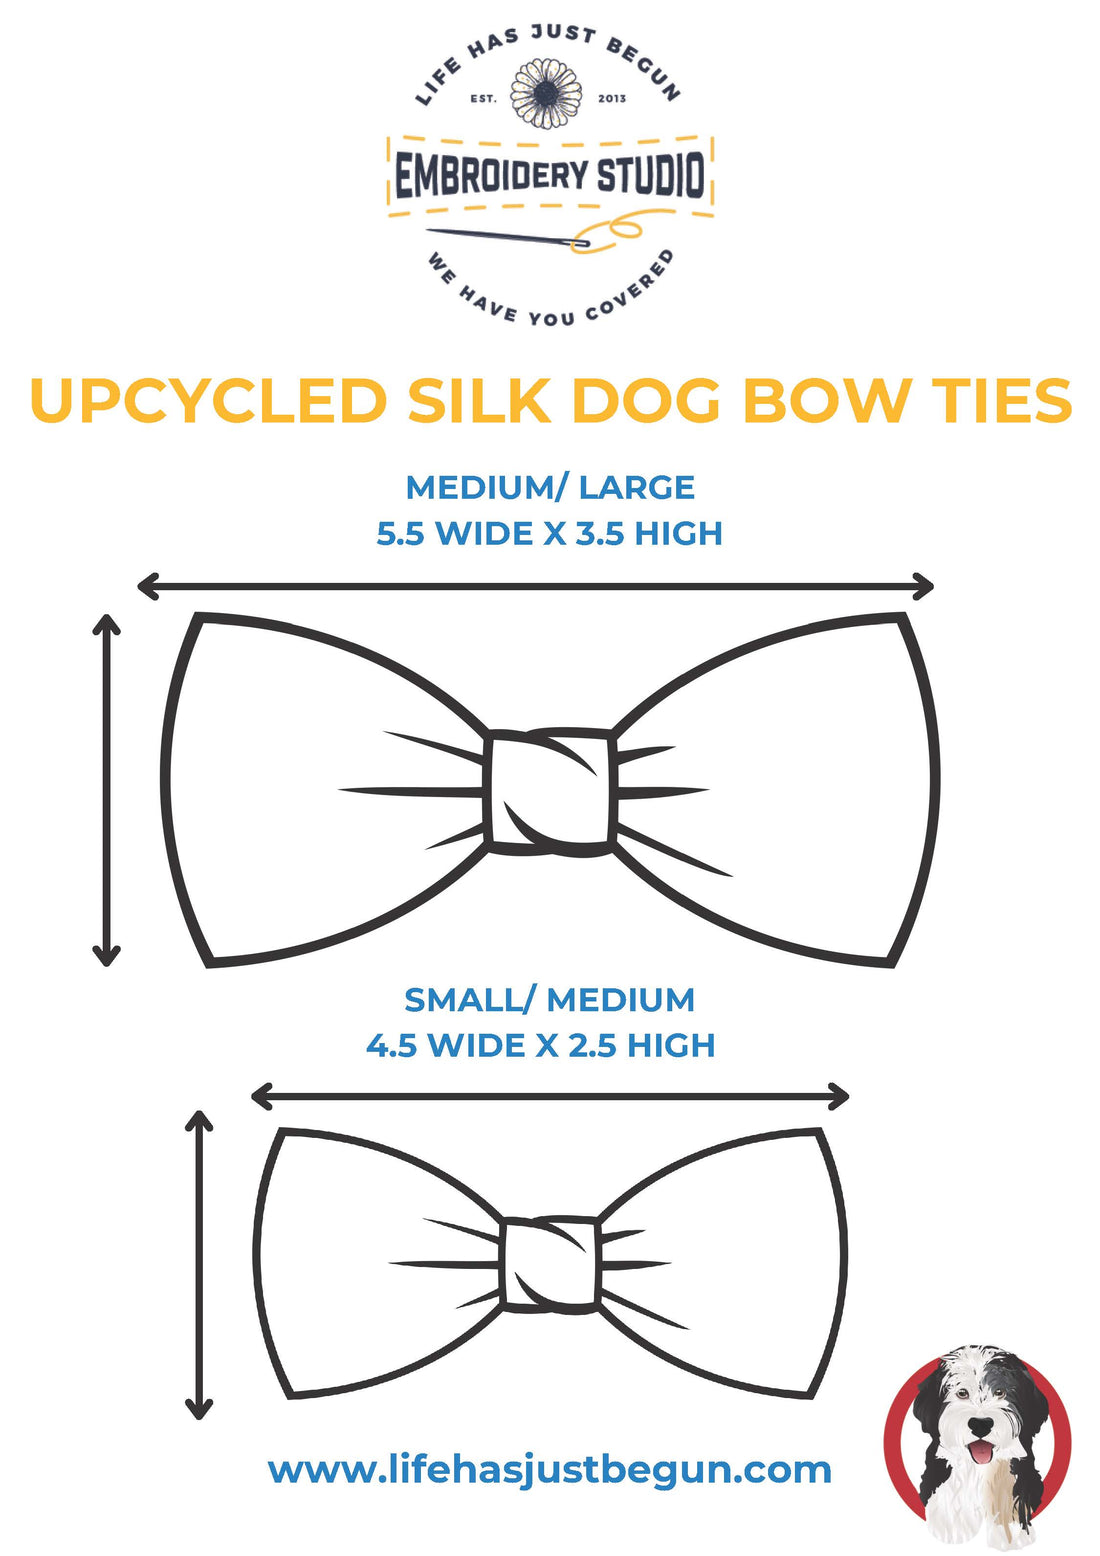 Upcycled silk dog bow tie size chart. - Life Has Just Begun